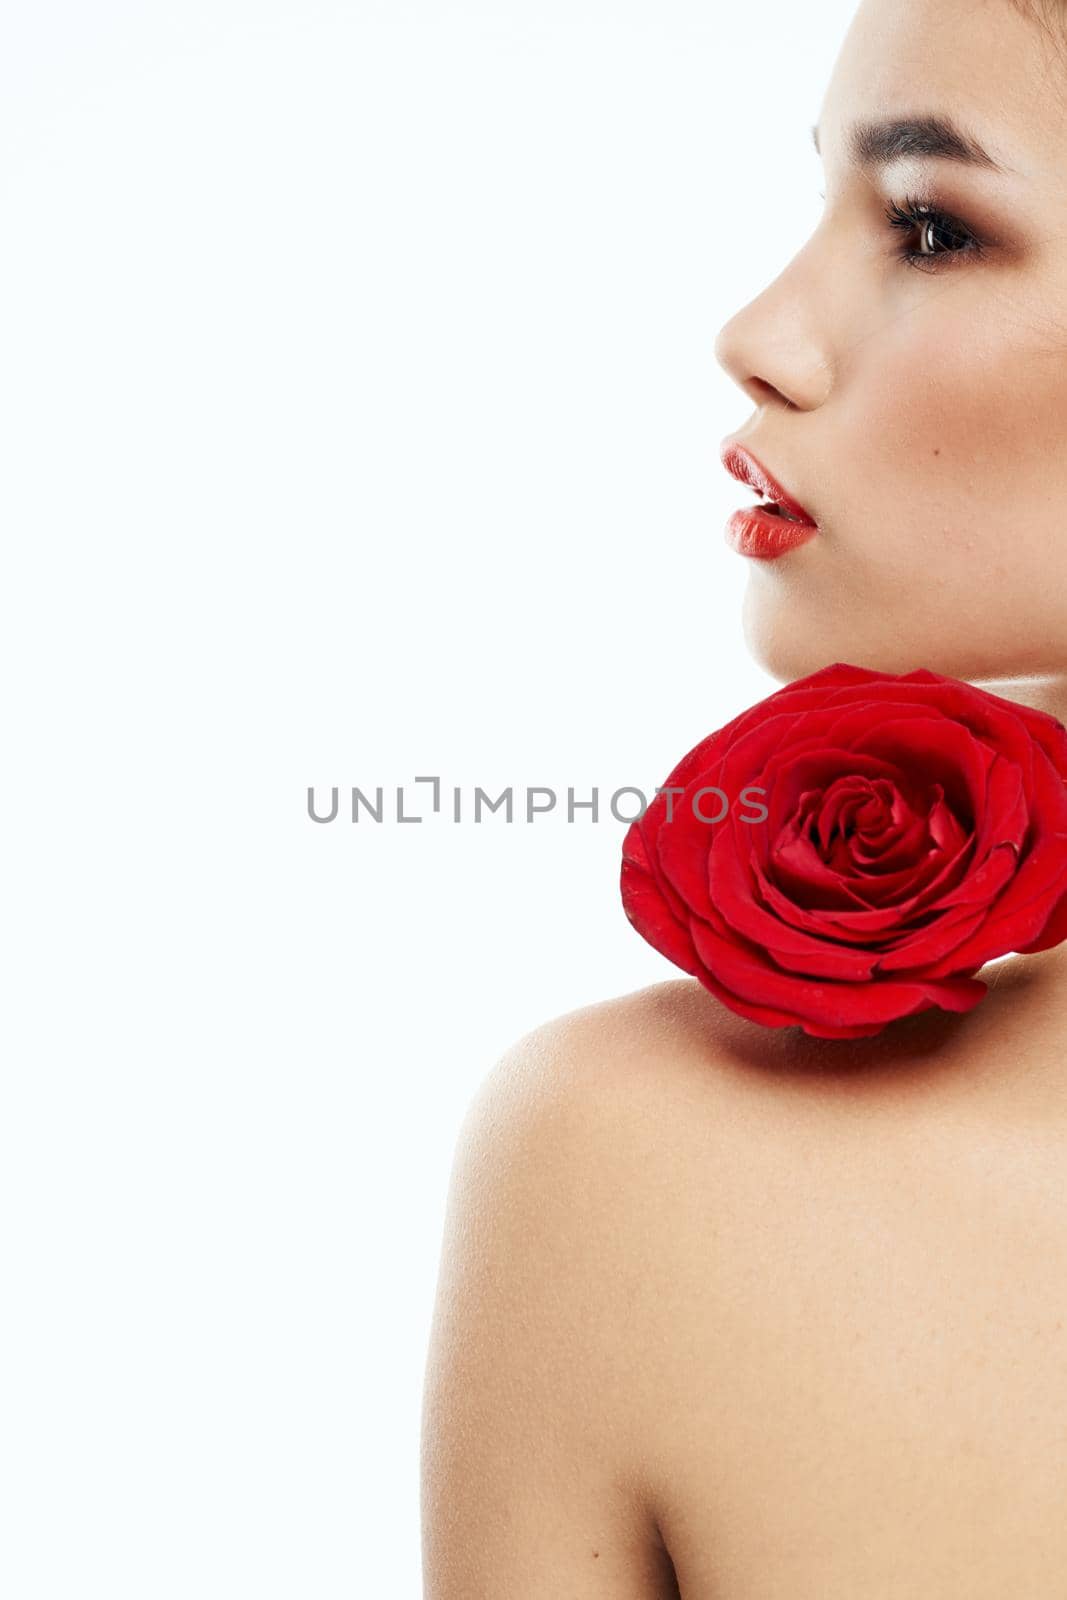 Back view of attractive brunette with red rose on naked shoulder by SHOTPRIME